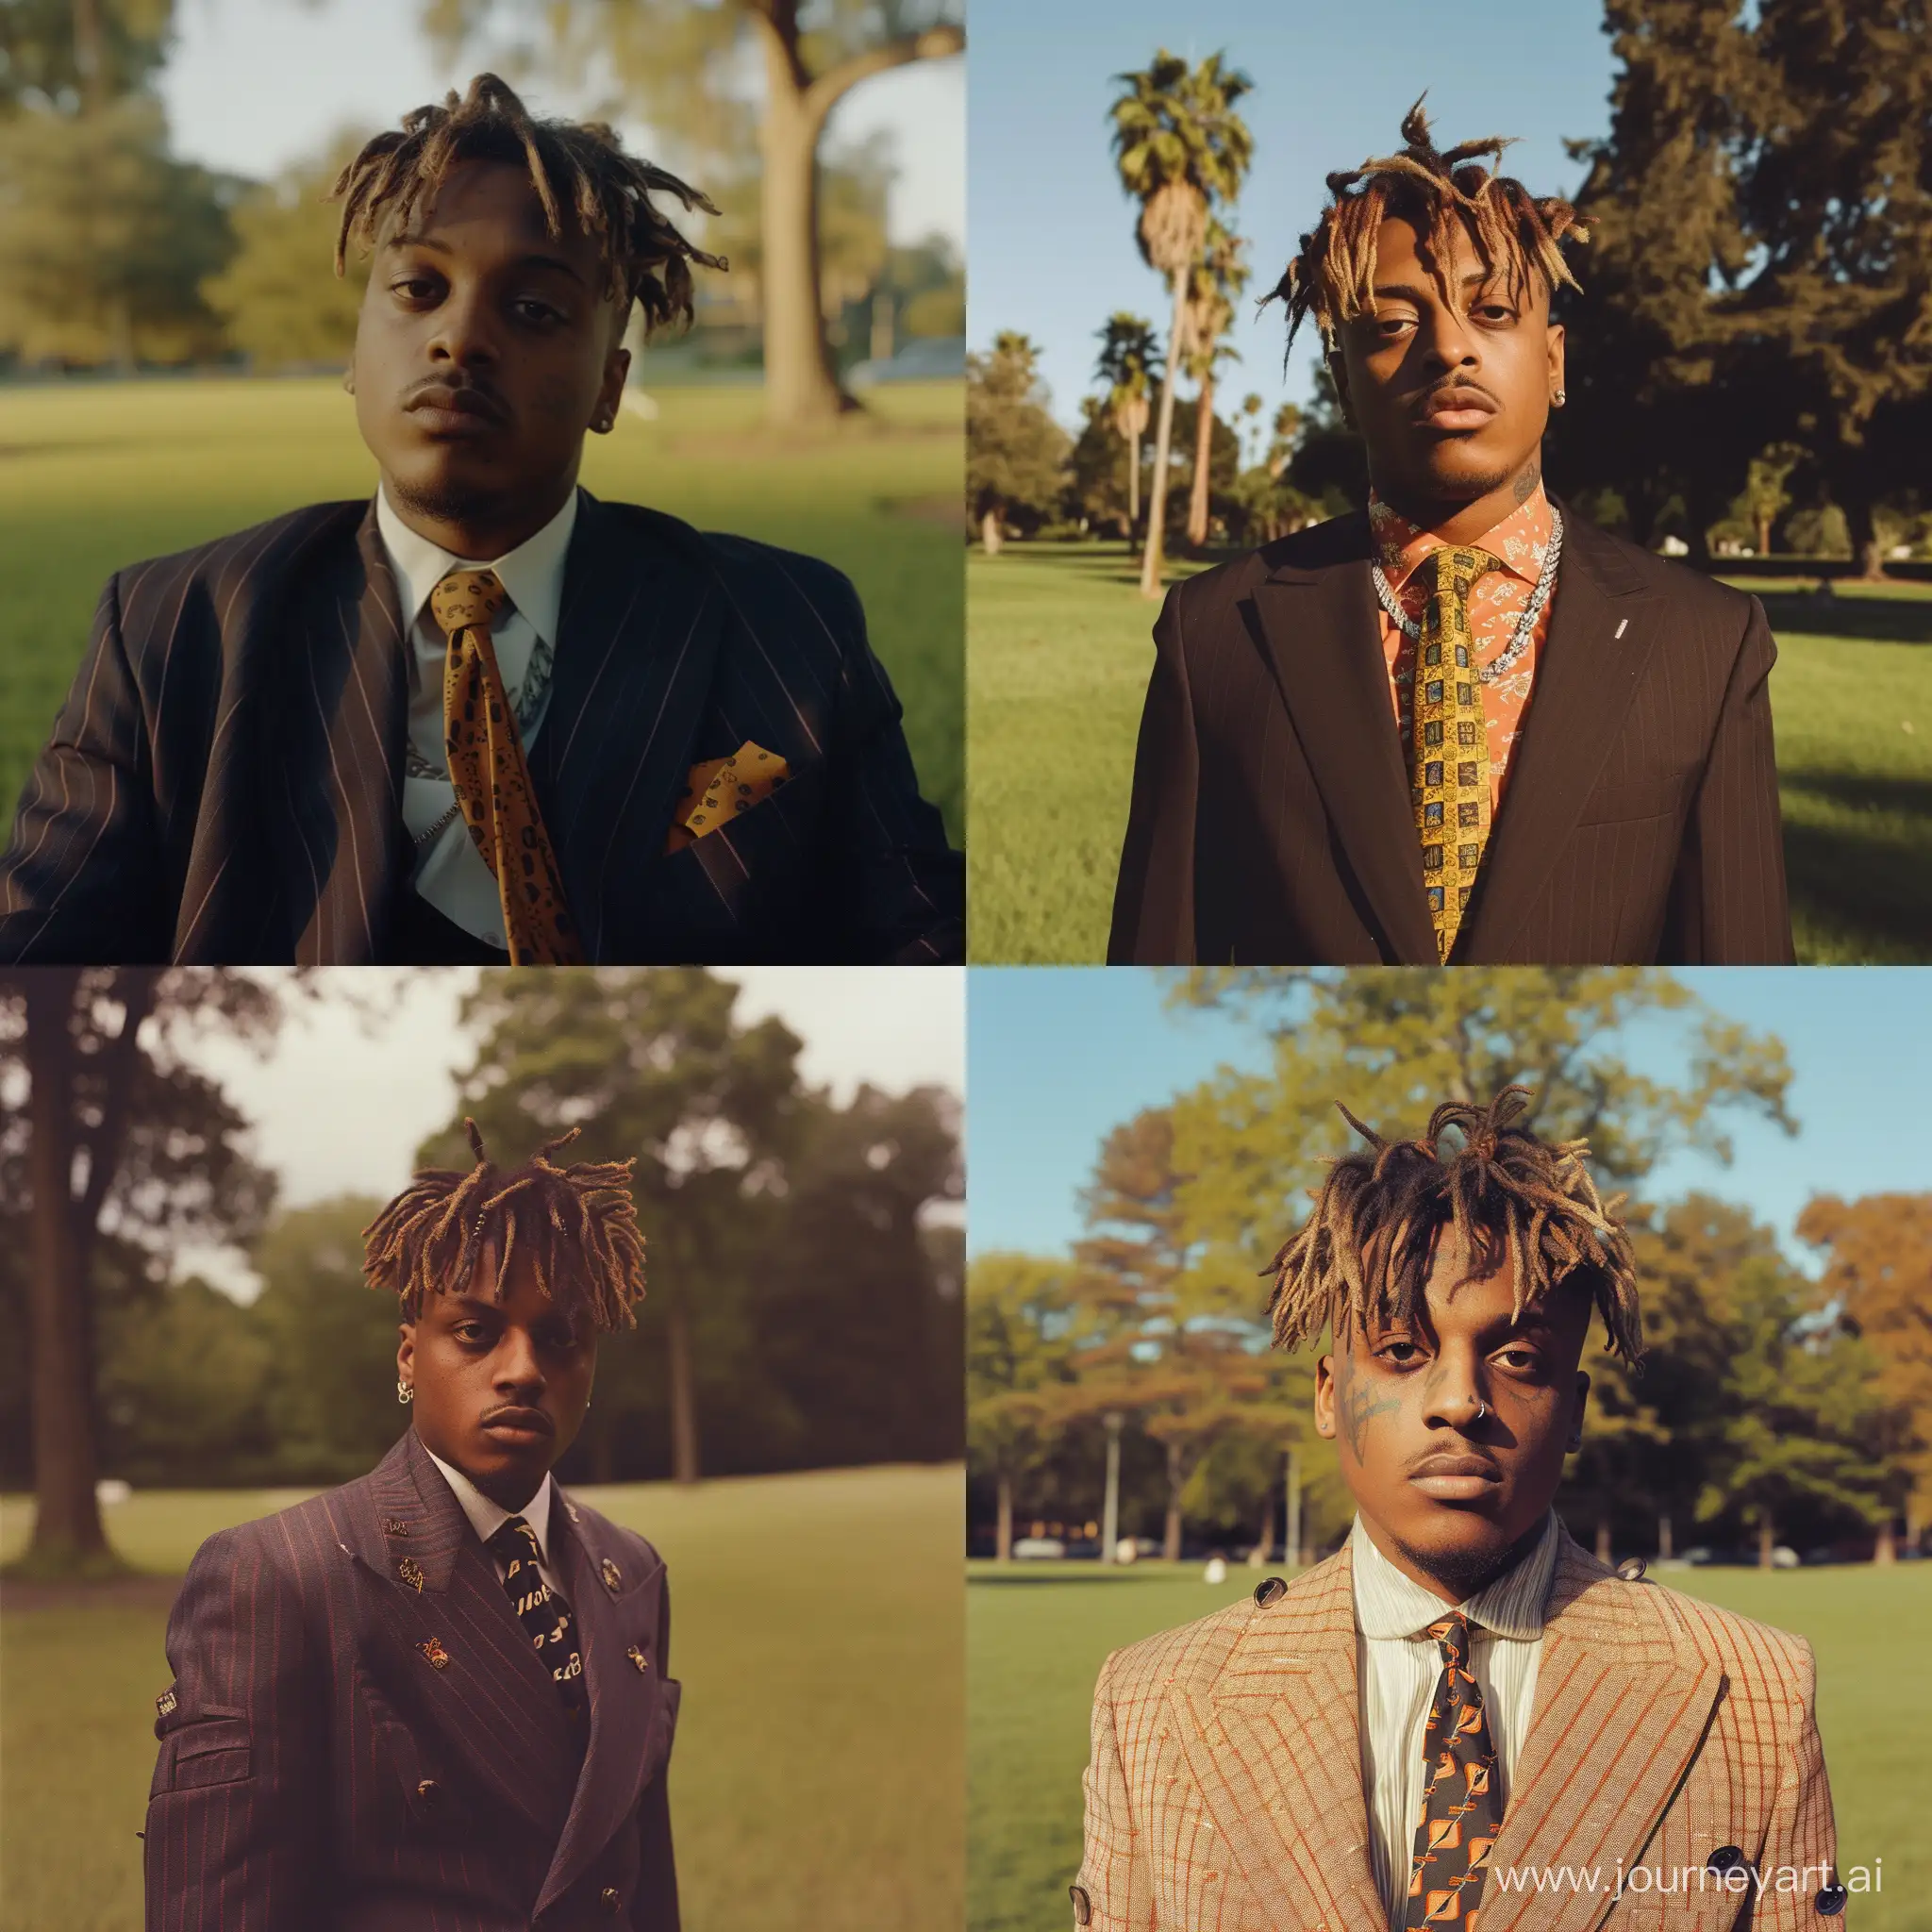 Juice WRLD wearing a suit and tie in a 1960s Movie Scene at a park.